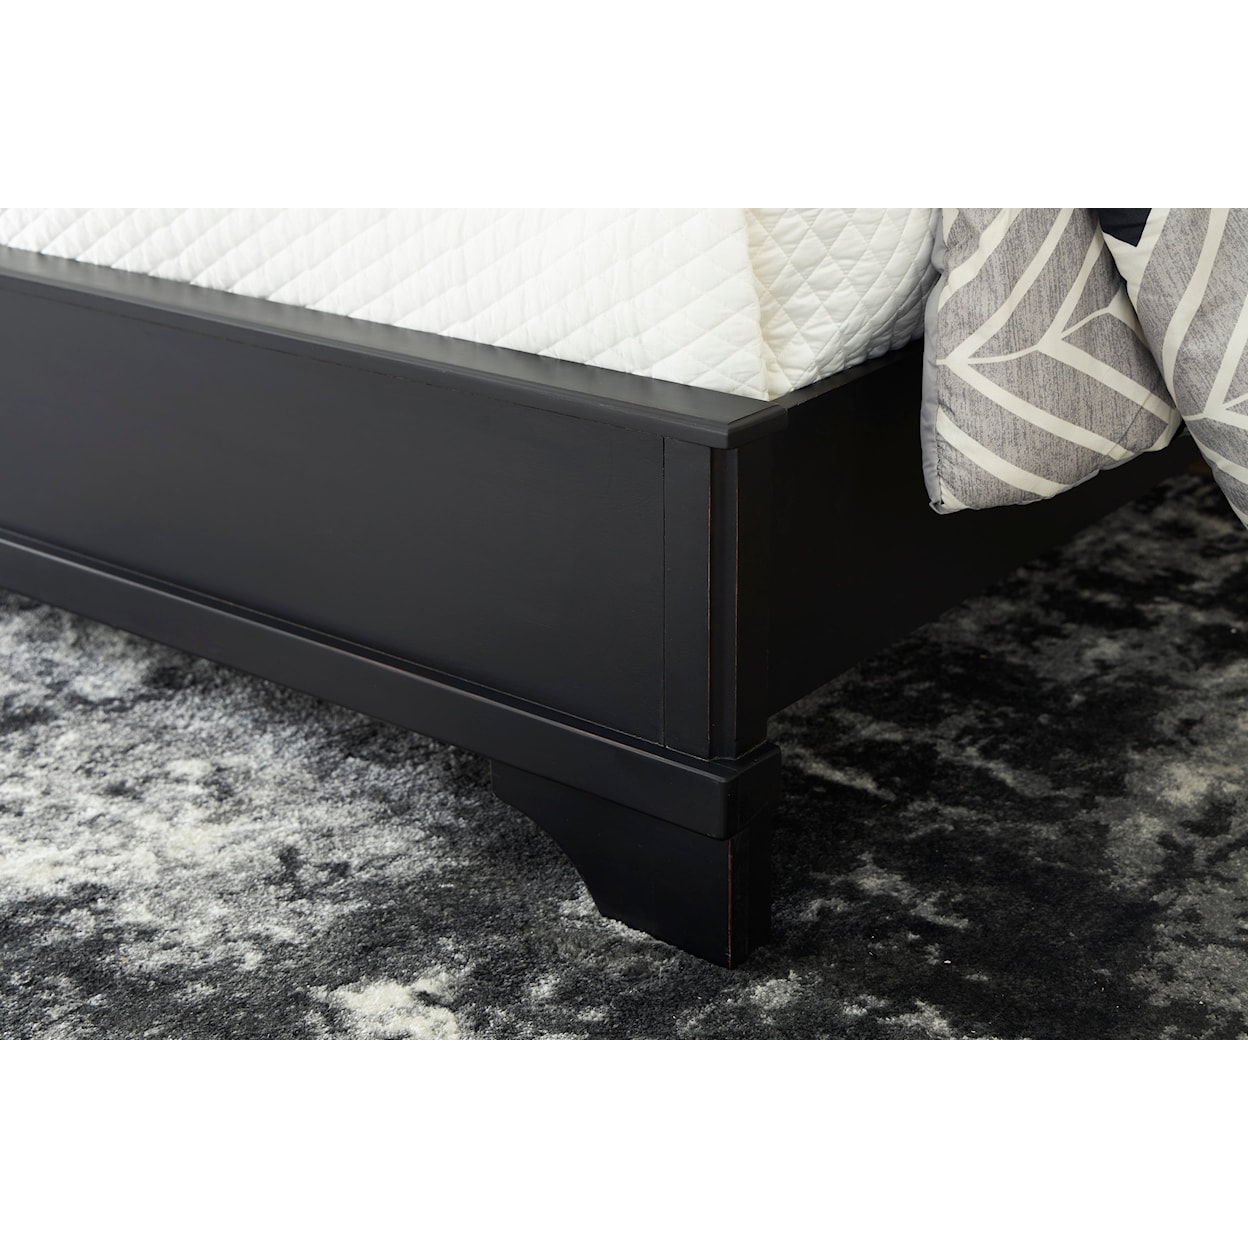 Signature Design by Ashley Furniture Chylanta King Sleigh Bed